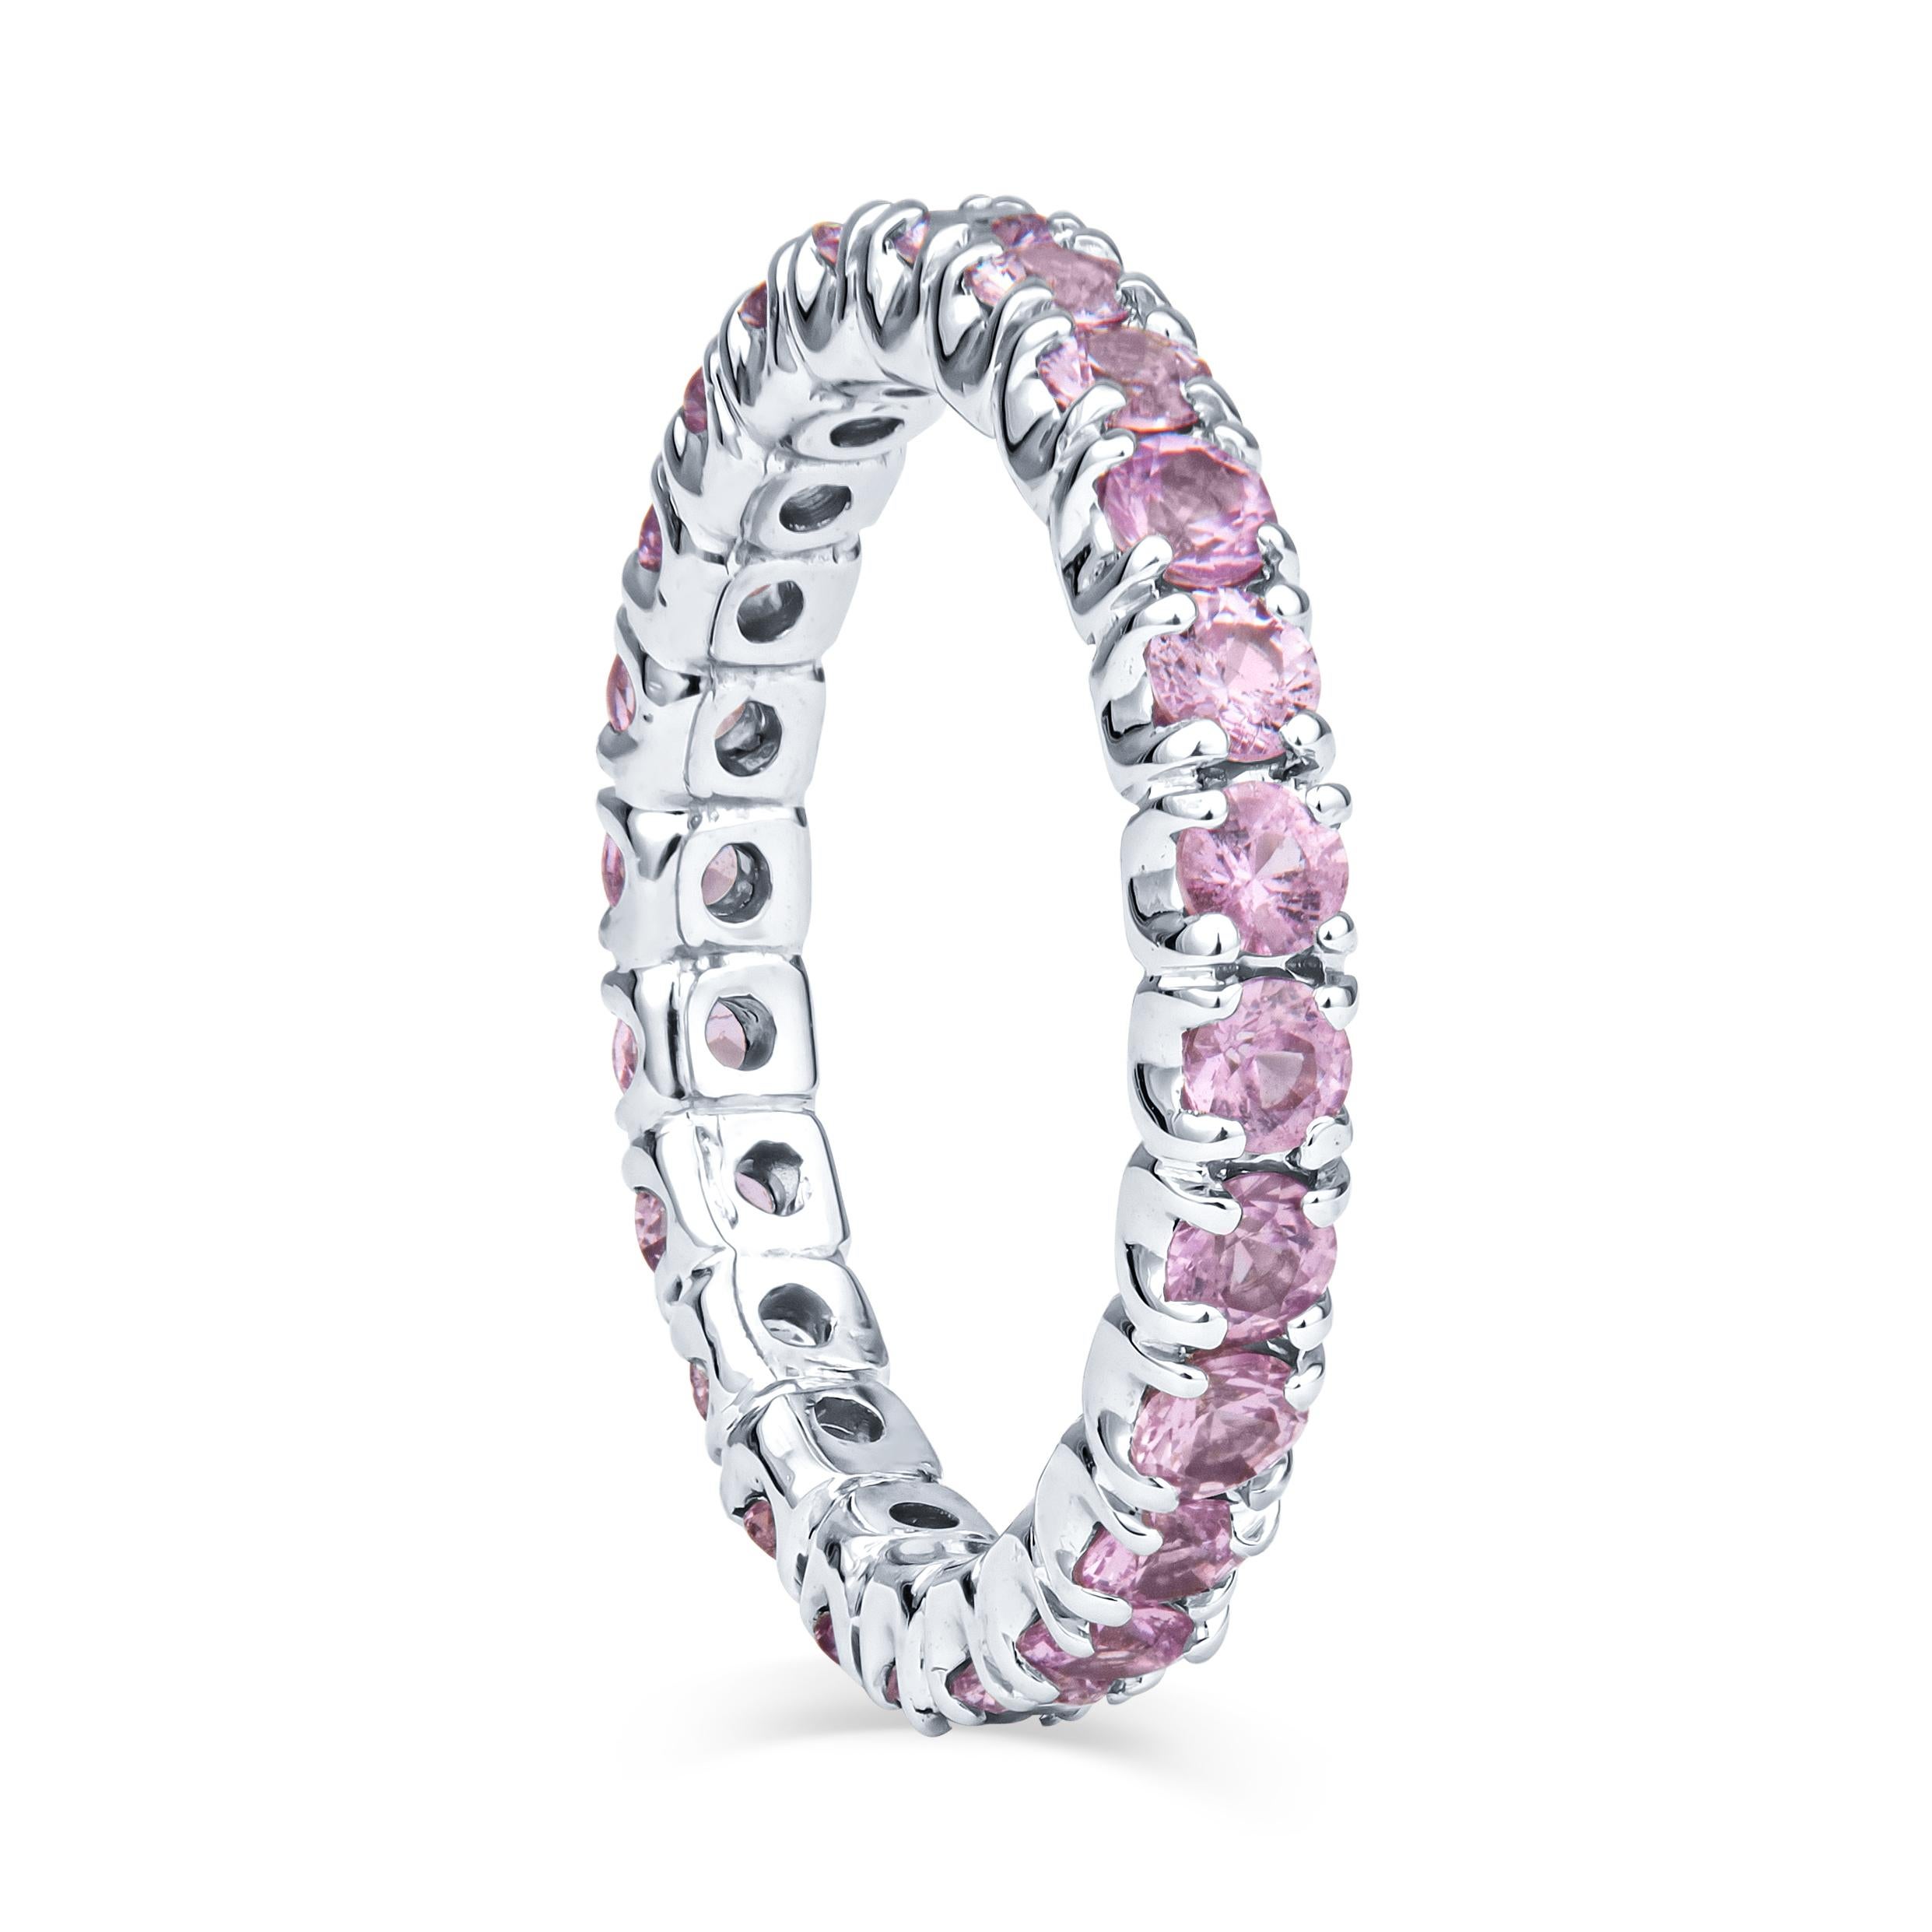 This precious stacking band is comprised of 1.37ct total weight in round, light pink sapphires, set in a 14kt white gold eternity band. It is currently a size 4; contact us for sizing options. This ring is a beautiful standalone piece, but it may